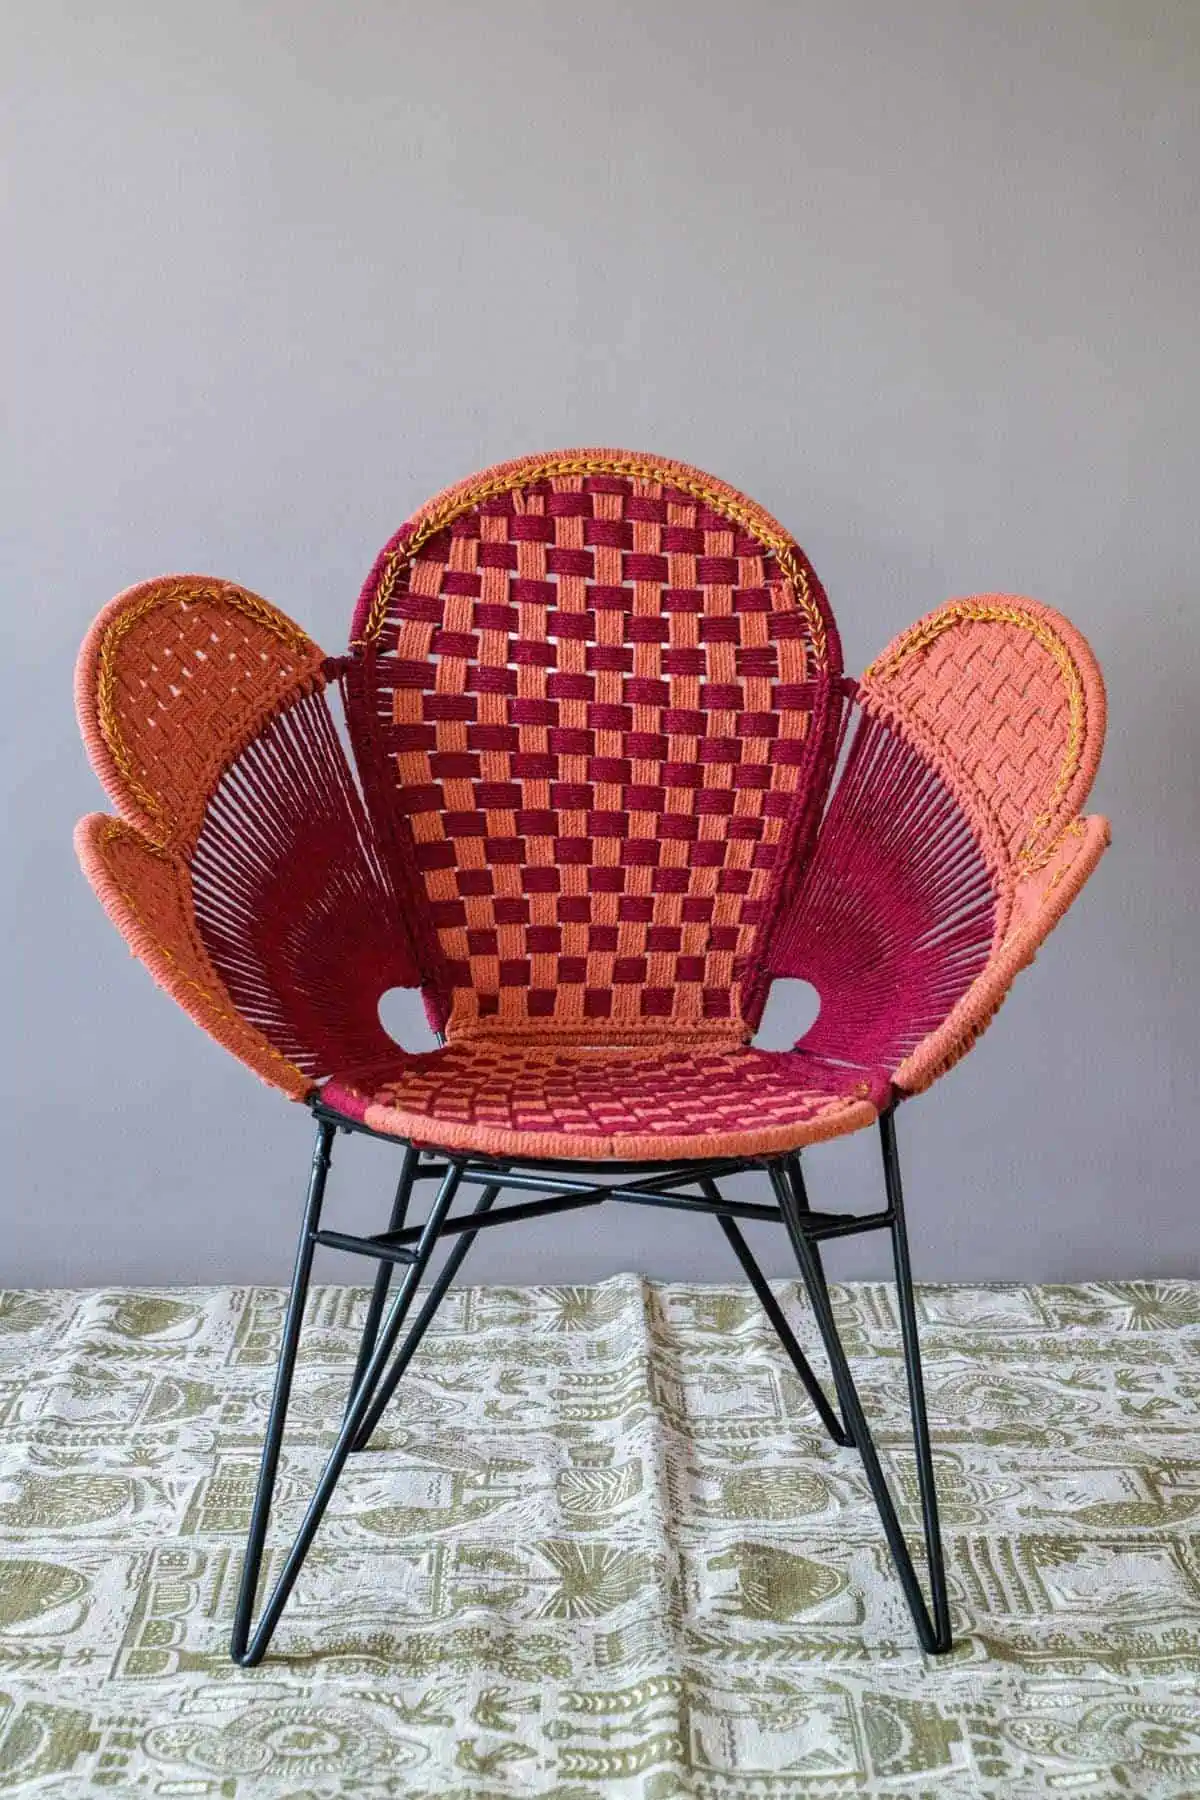 Multicolored rattan chair with metal legs and an eccentric butterfly design